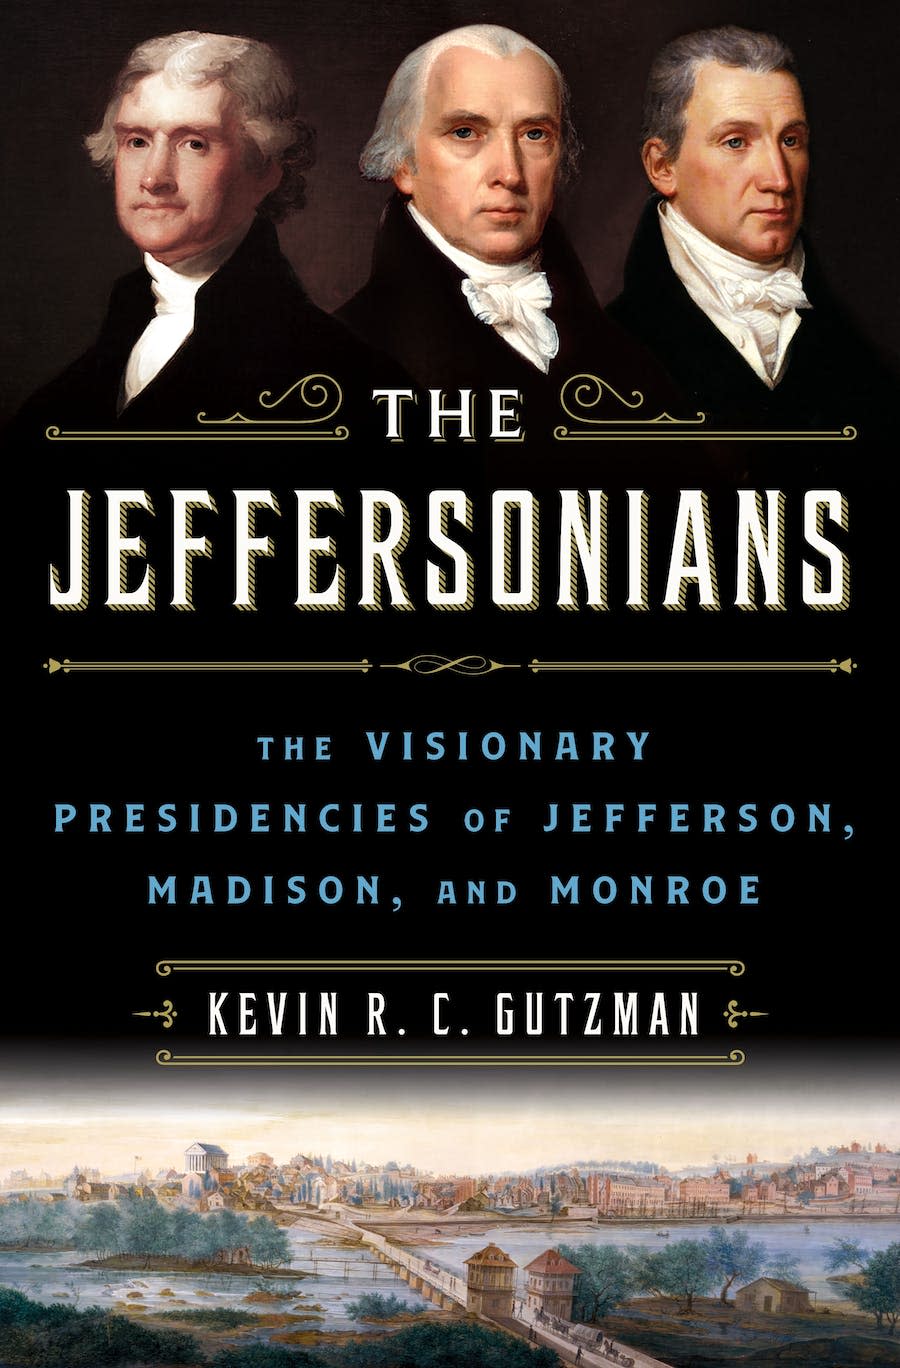 "The Jeffersonians: The Visionary Presidencies of Jefferson, Madison, and Monroe," by Kevin R. C. Gutzman.